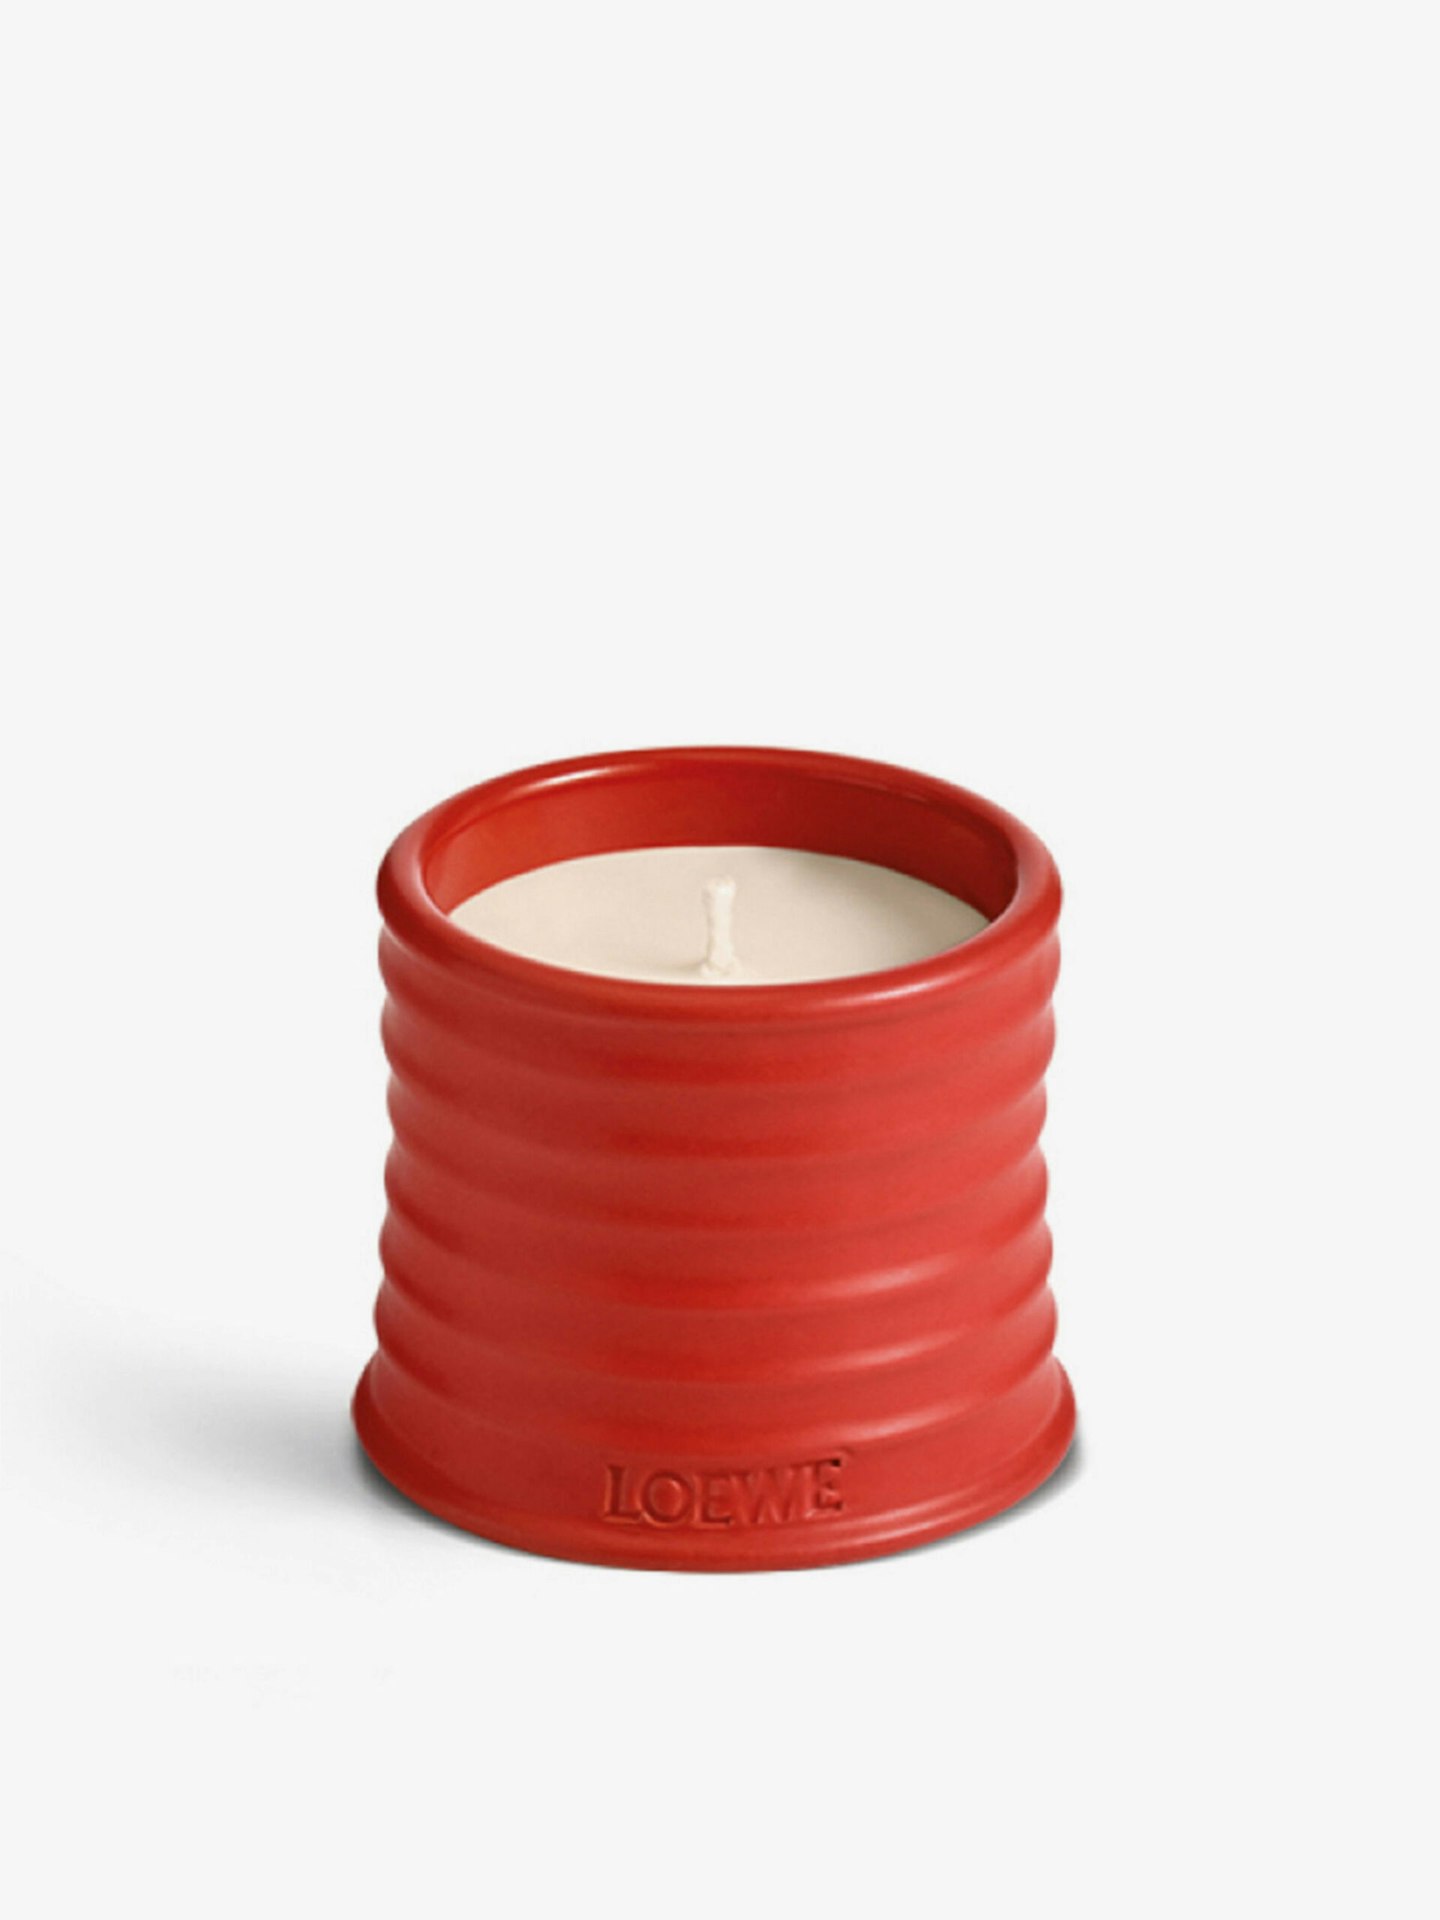 Loewe, Tomato Leaves Scented Candle